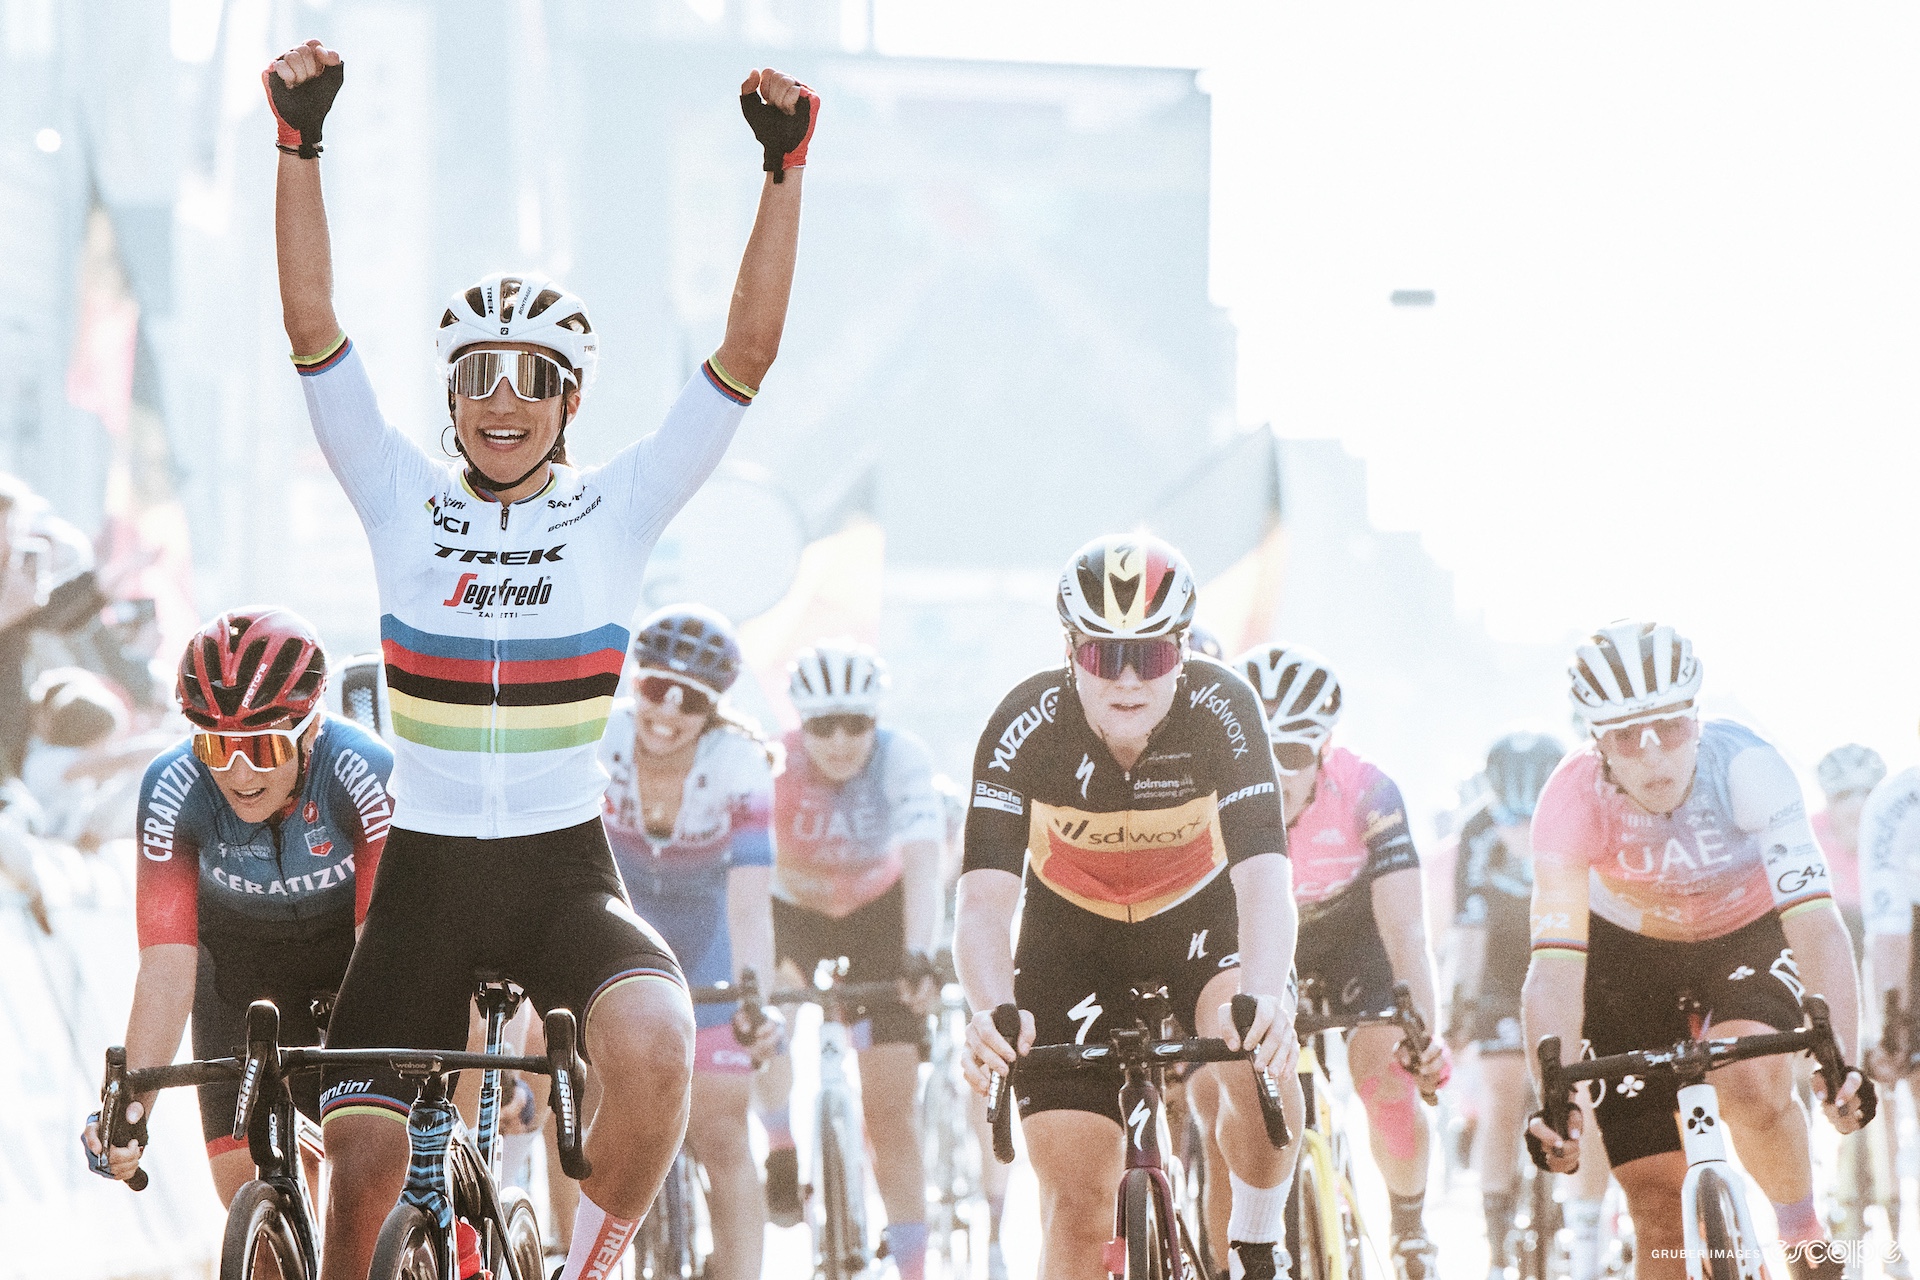 Elisa Balsamo celebrates as she wins 2022 Gent-Wevelgem. She has her arms in the air as riders including Lotte Kopecky sit up behind her in frustration.